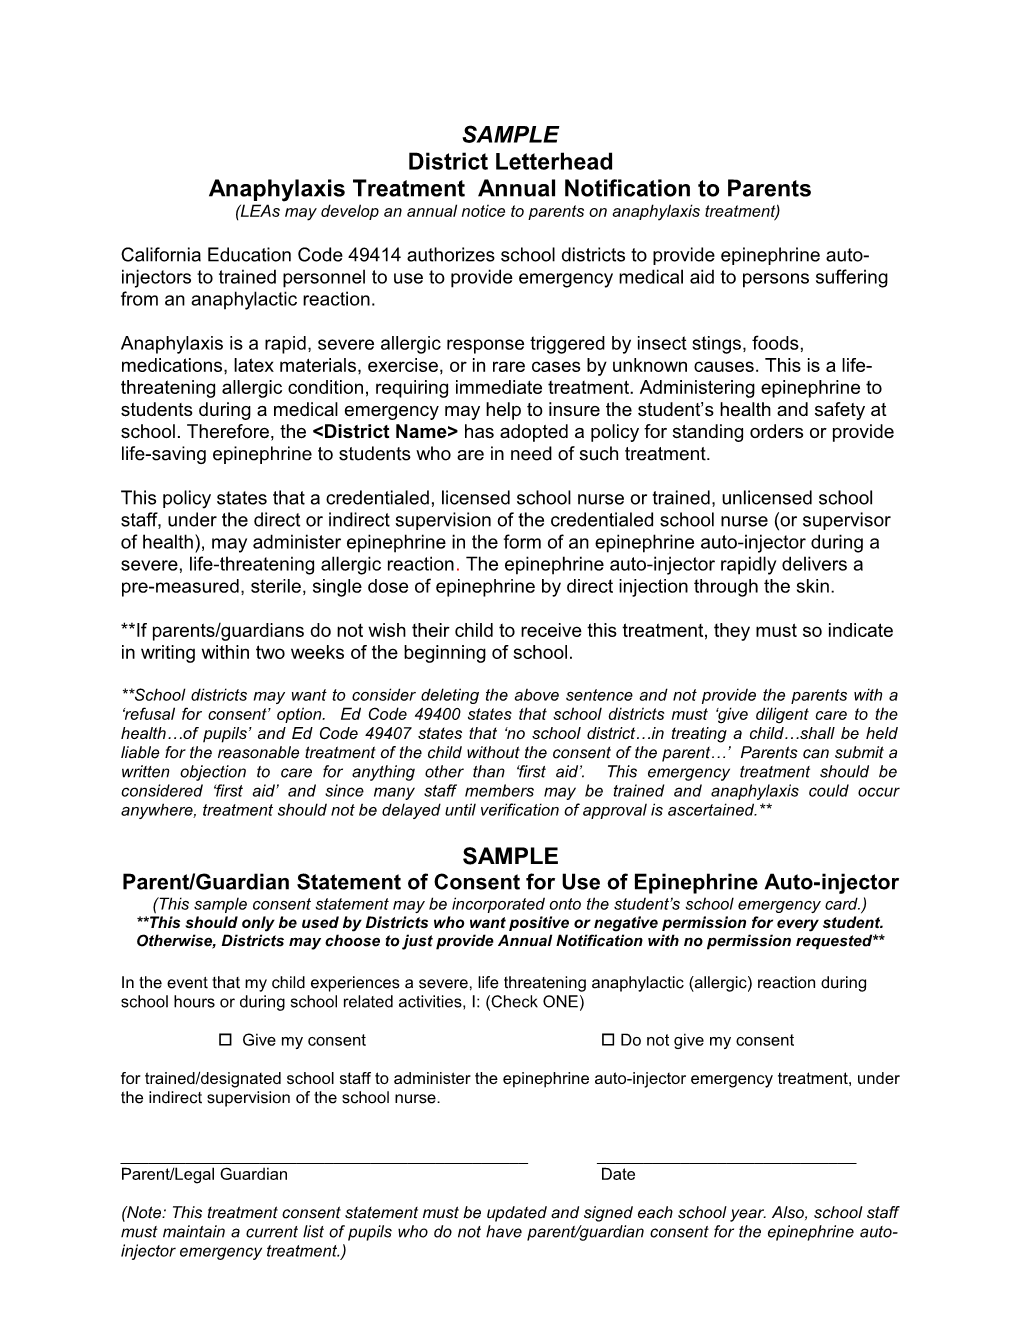 Anaphylaxis Treatment Annual Notification to Parents